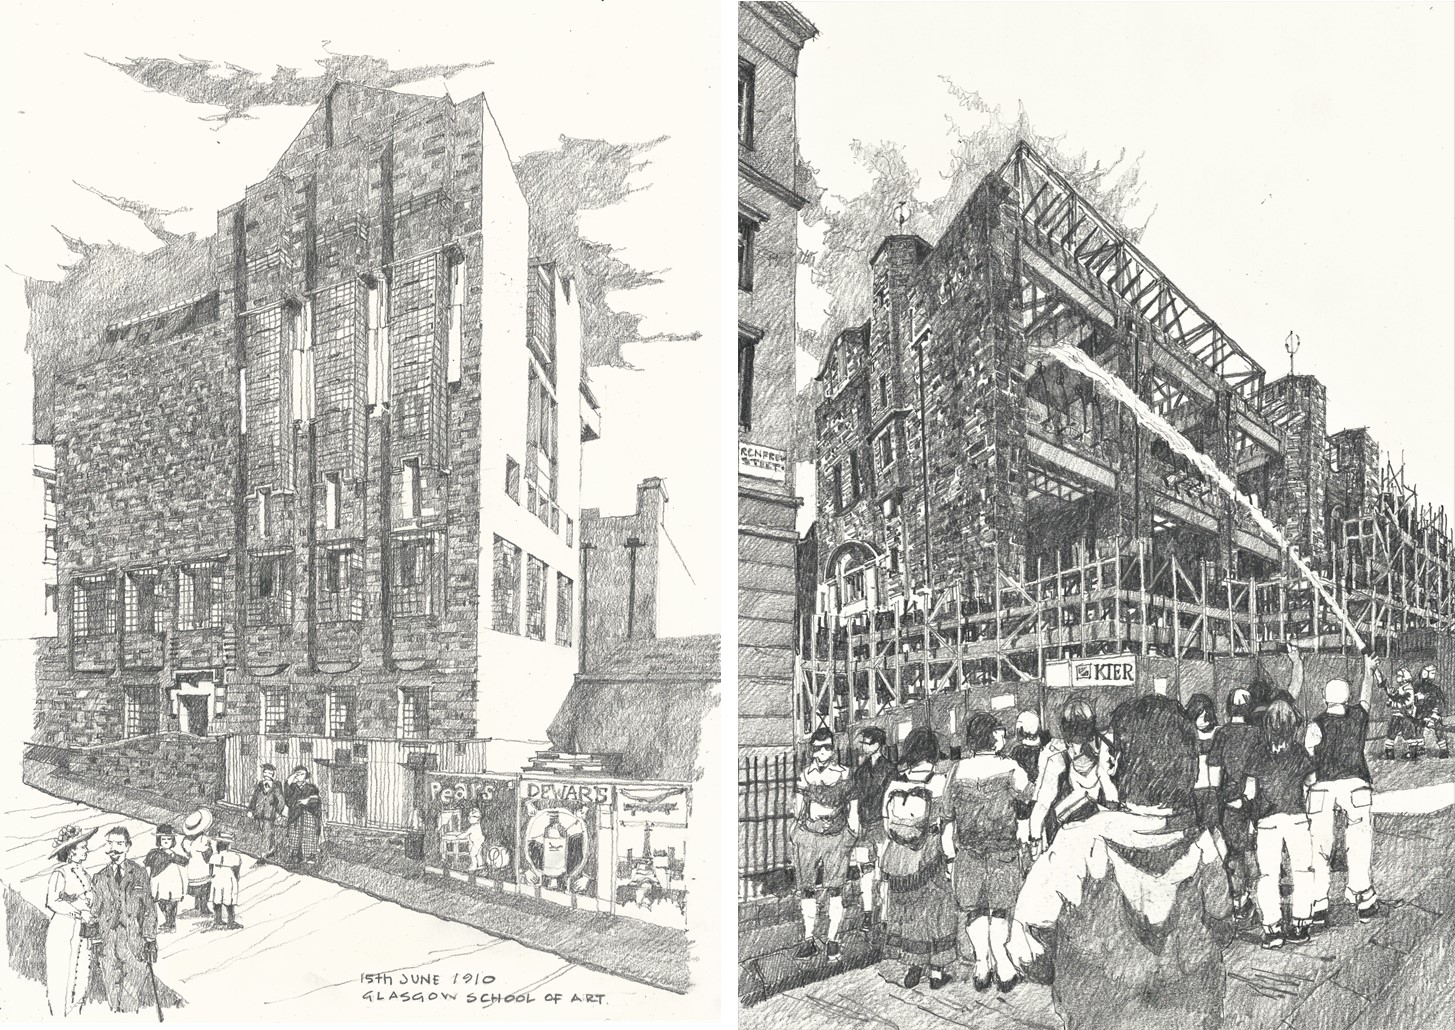 Auction success for Alan Dunlop's Glasgow School of Art drawings